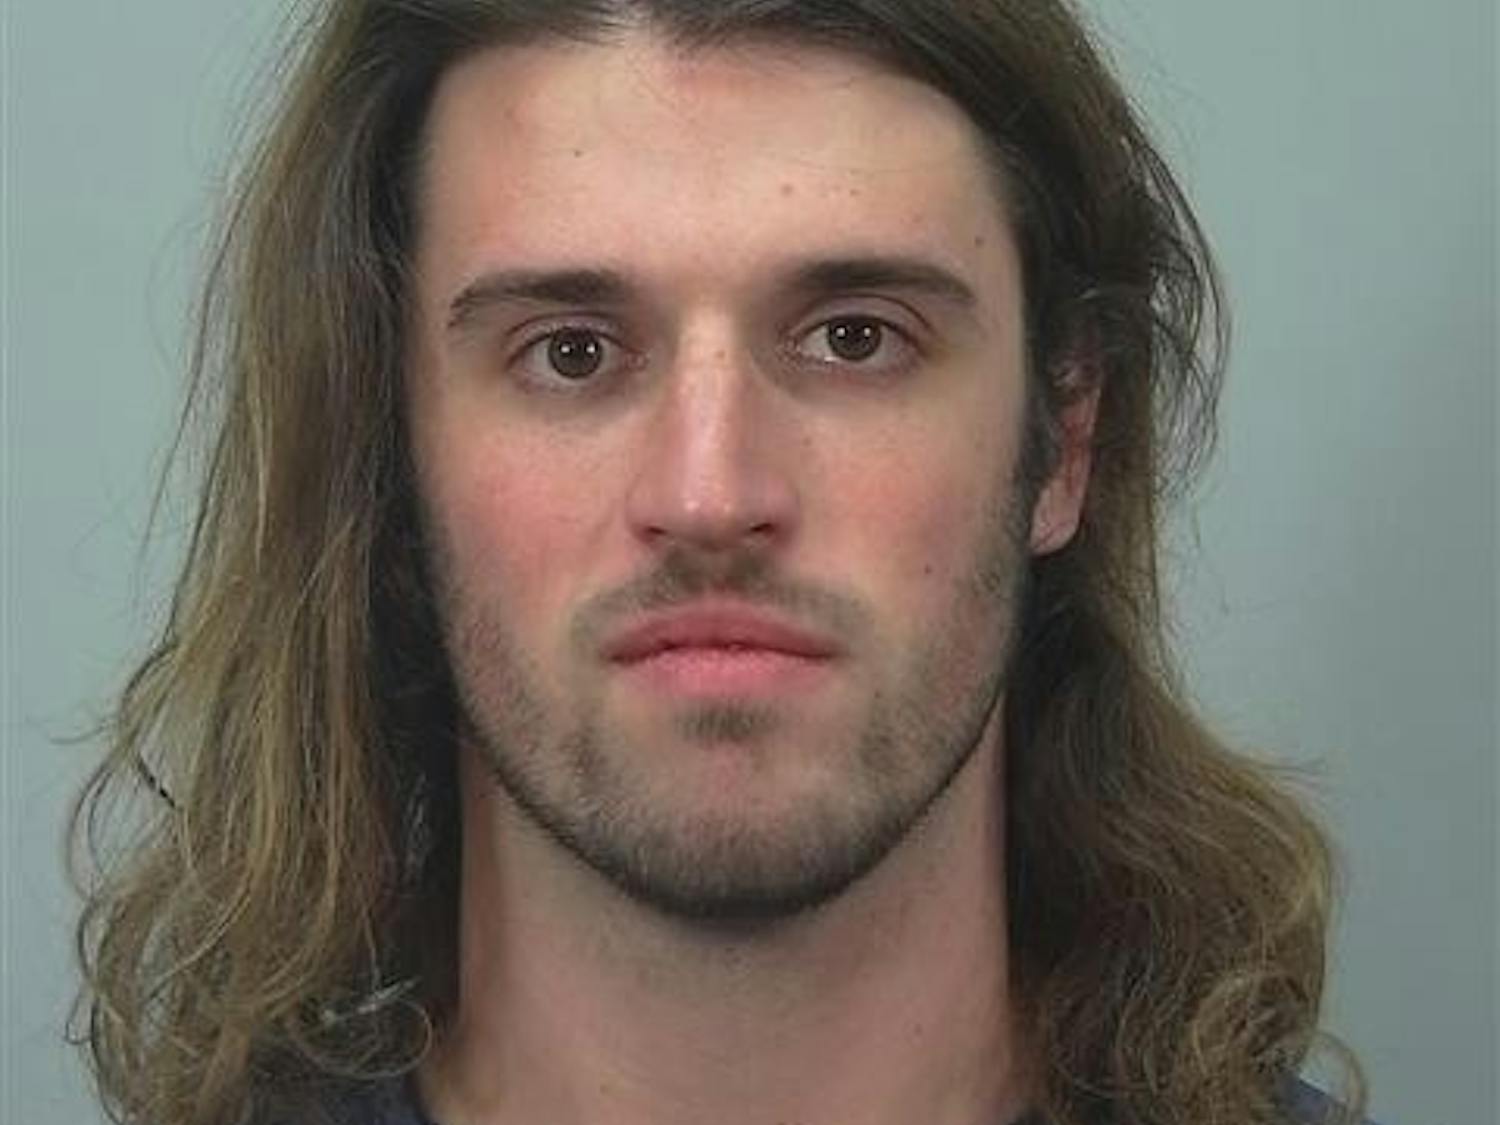 Expelled UW-Madison student Alec Cook is facing another felony charge, in sexual assault cases now involving eleven women, after being accused of cornering a student in a dormitory laundry room in 2014.&nbsp;